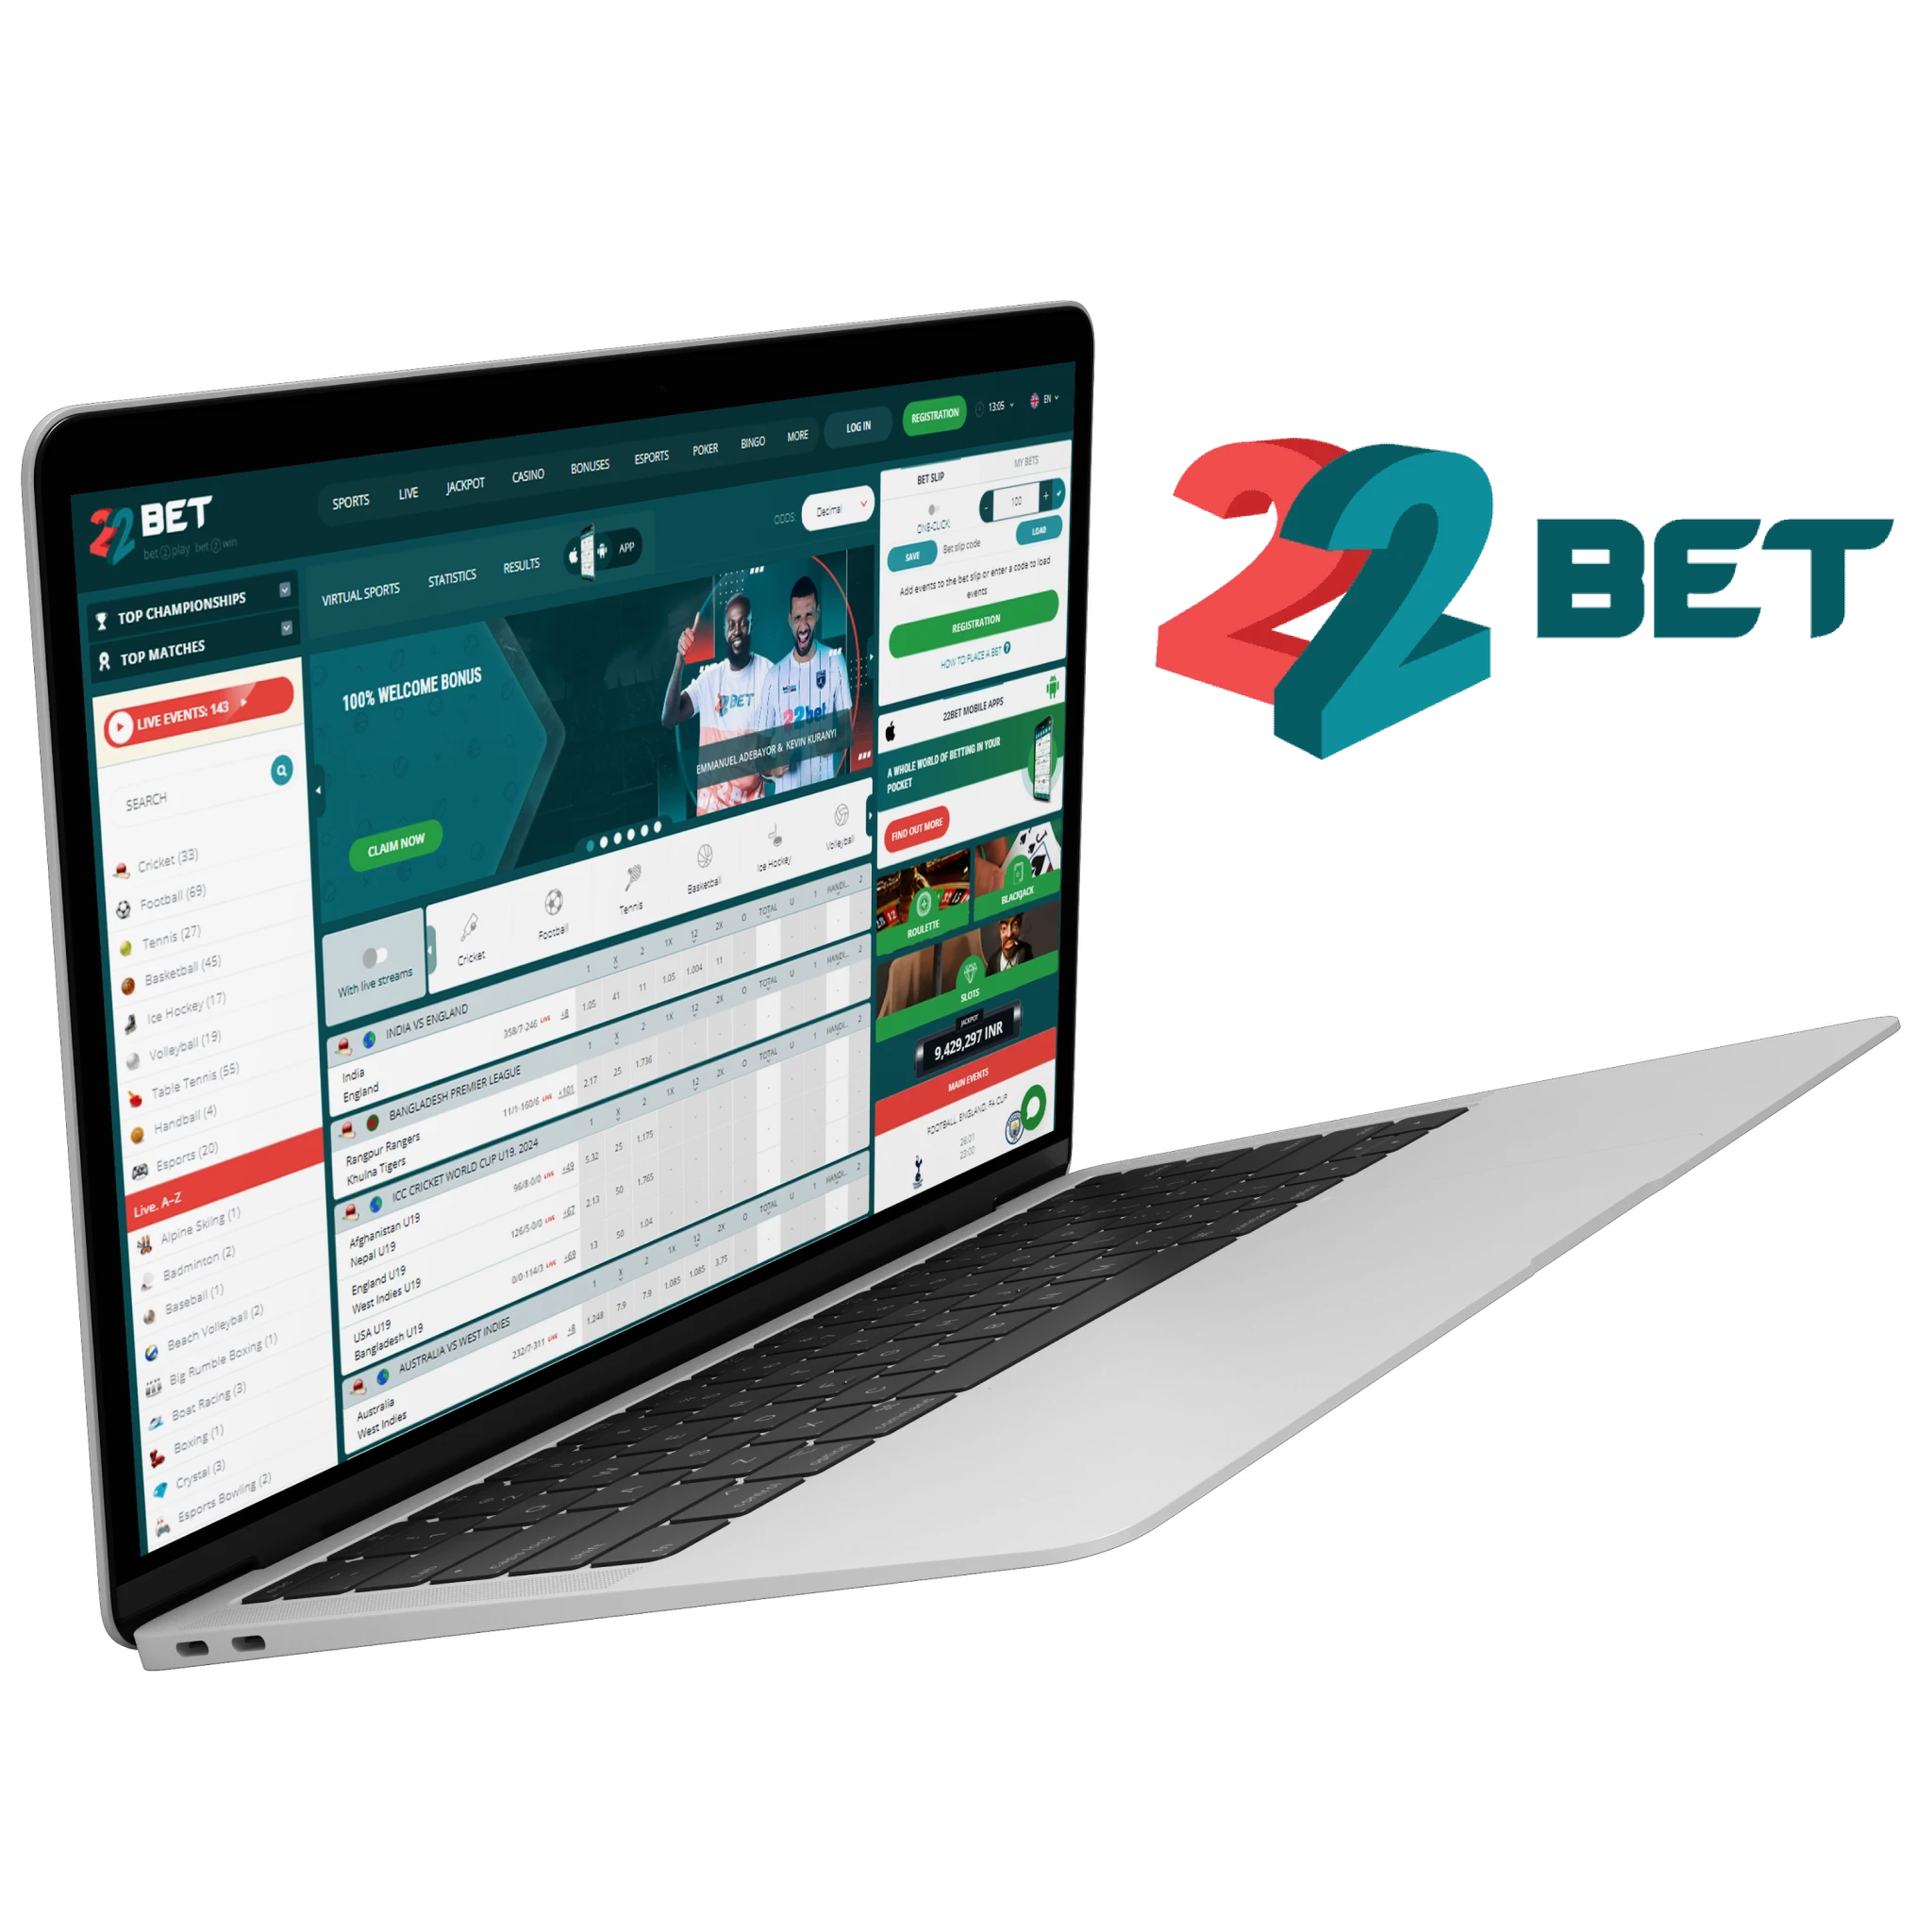 22bet website for sports betting.